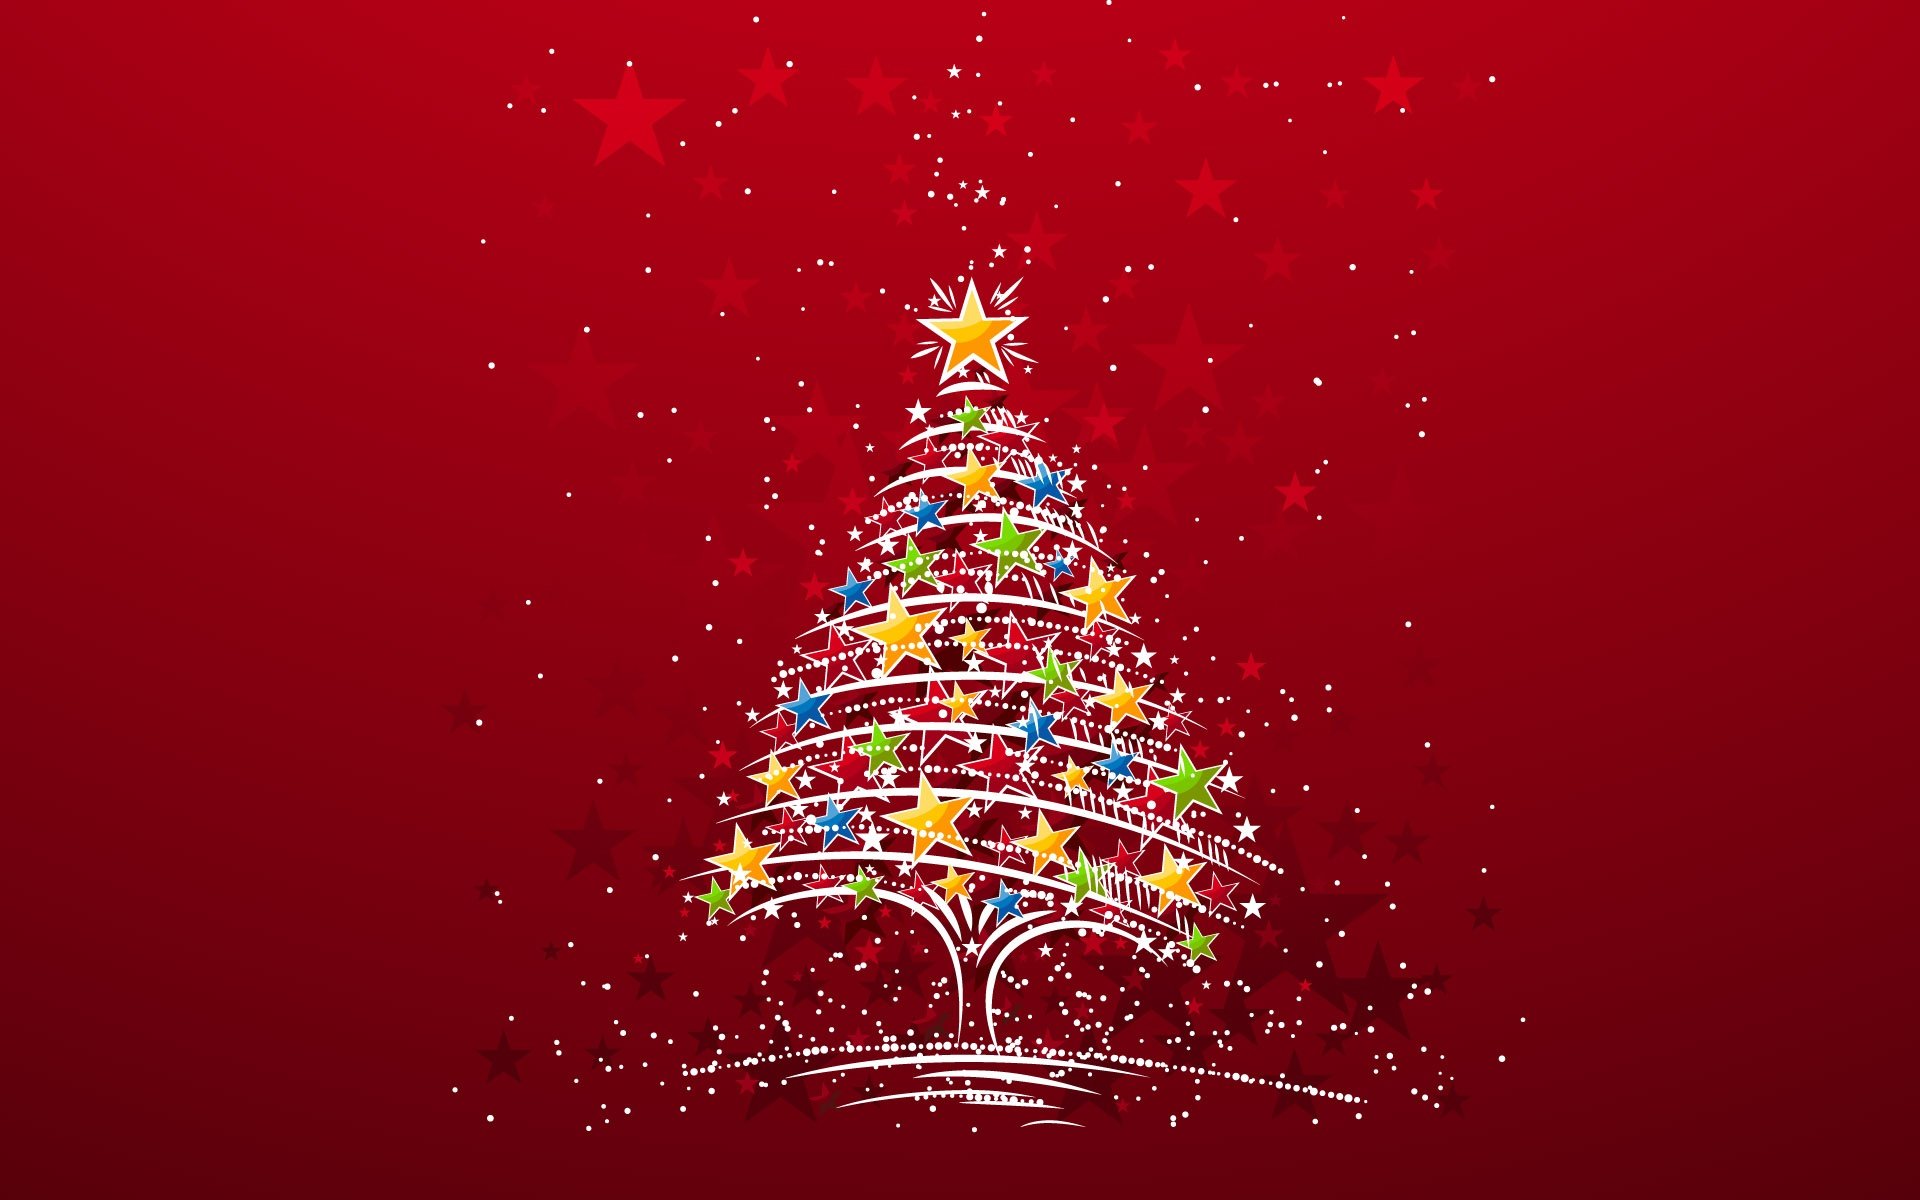 Colorful Christmas Tree Wallpaper in jpg format for free download